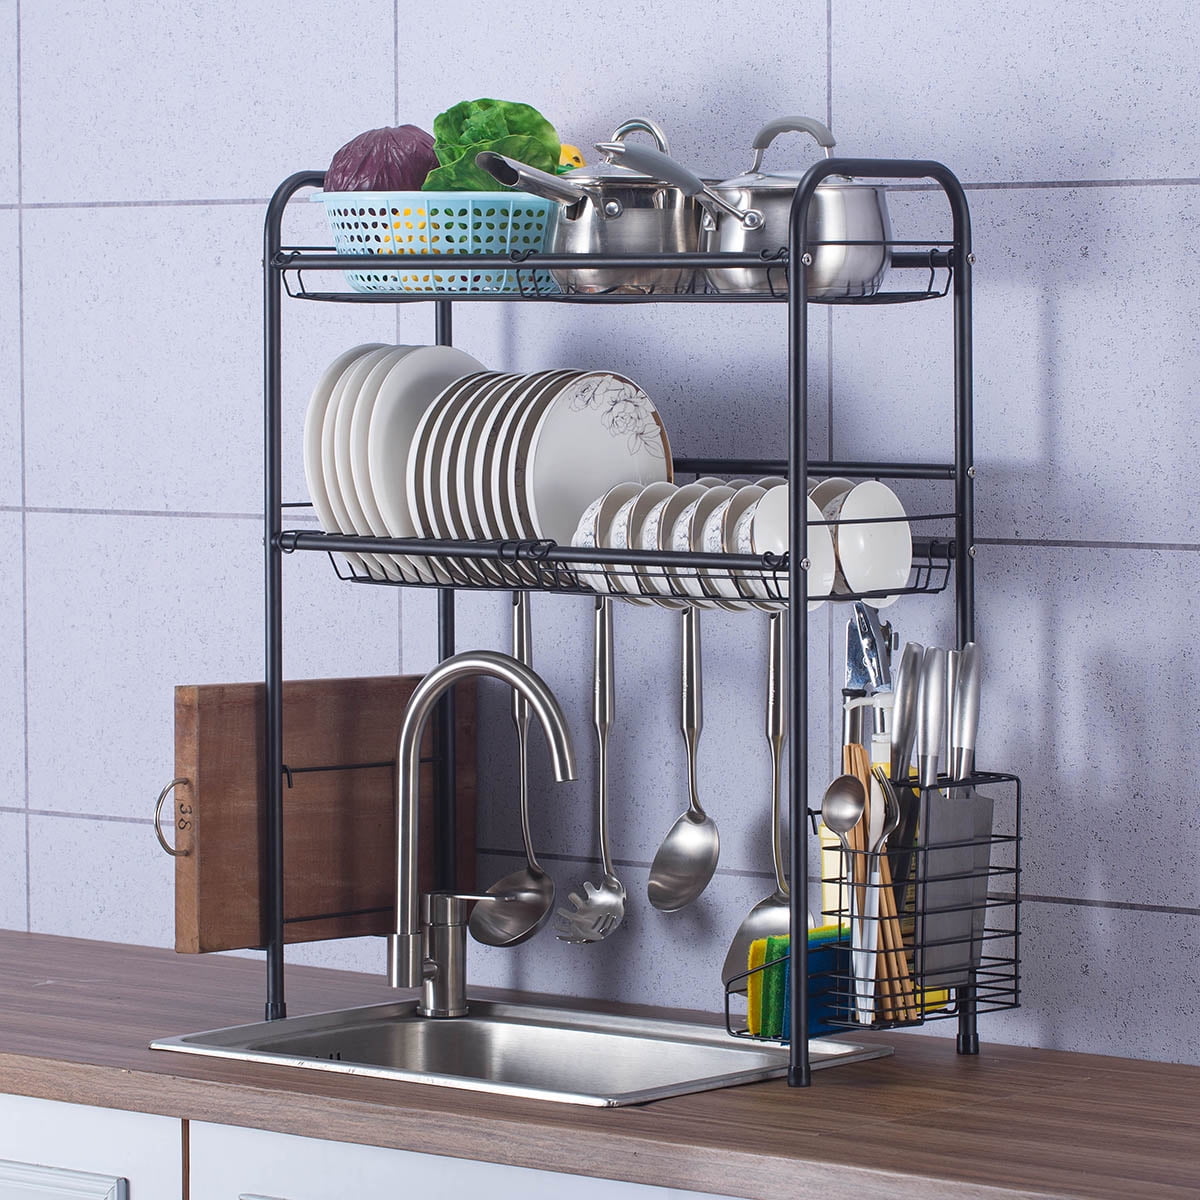 Details about   Stainless Steel Dish Rack Over Sink Drain Drying Shelf Organizer Sturdy SALE NEW 